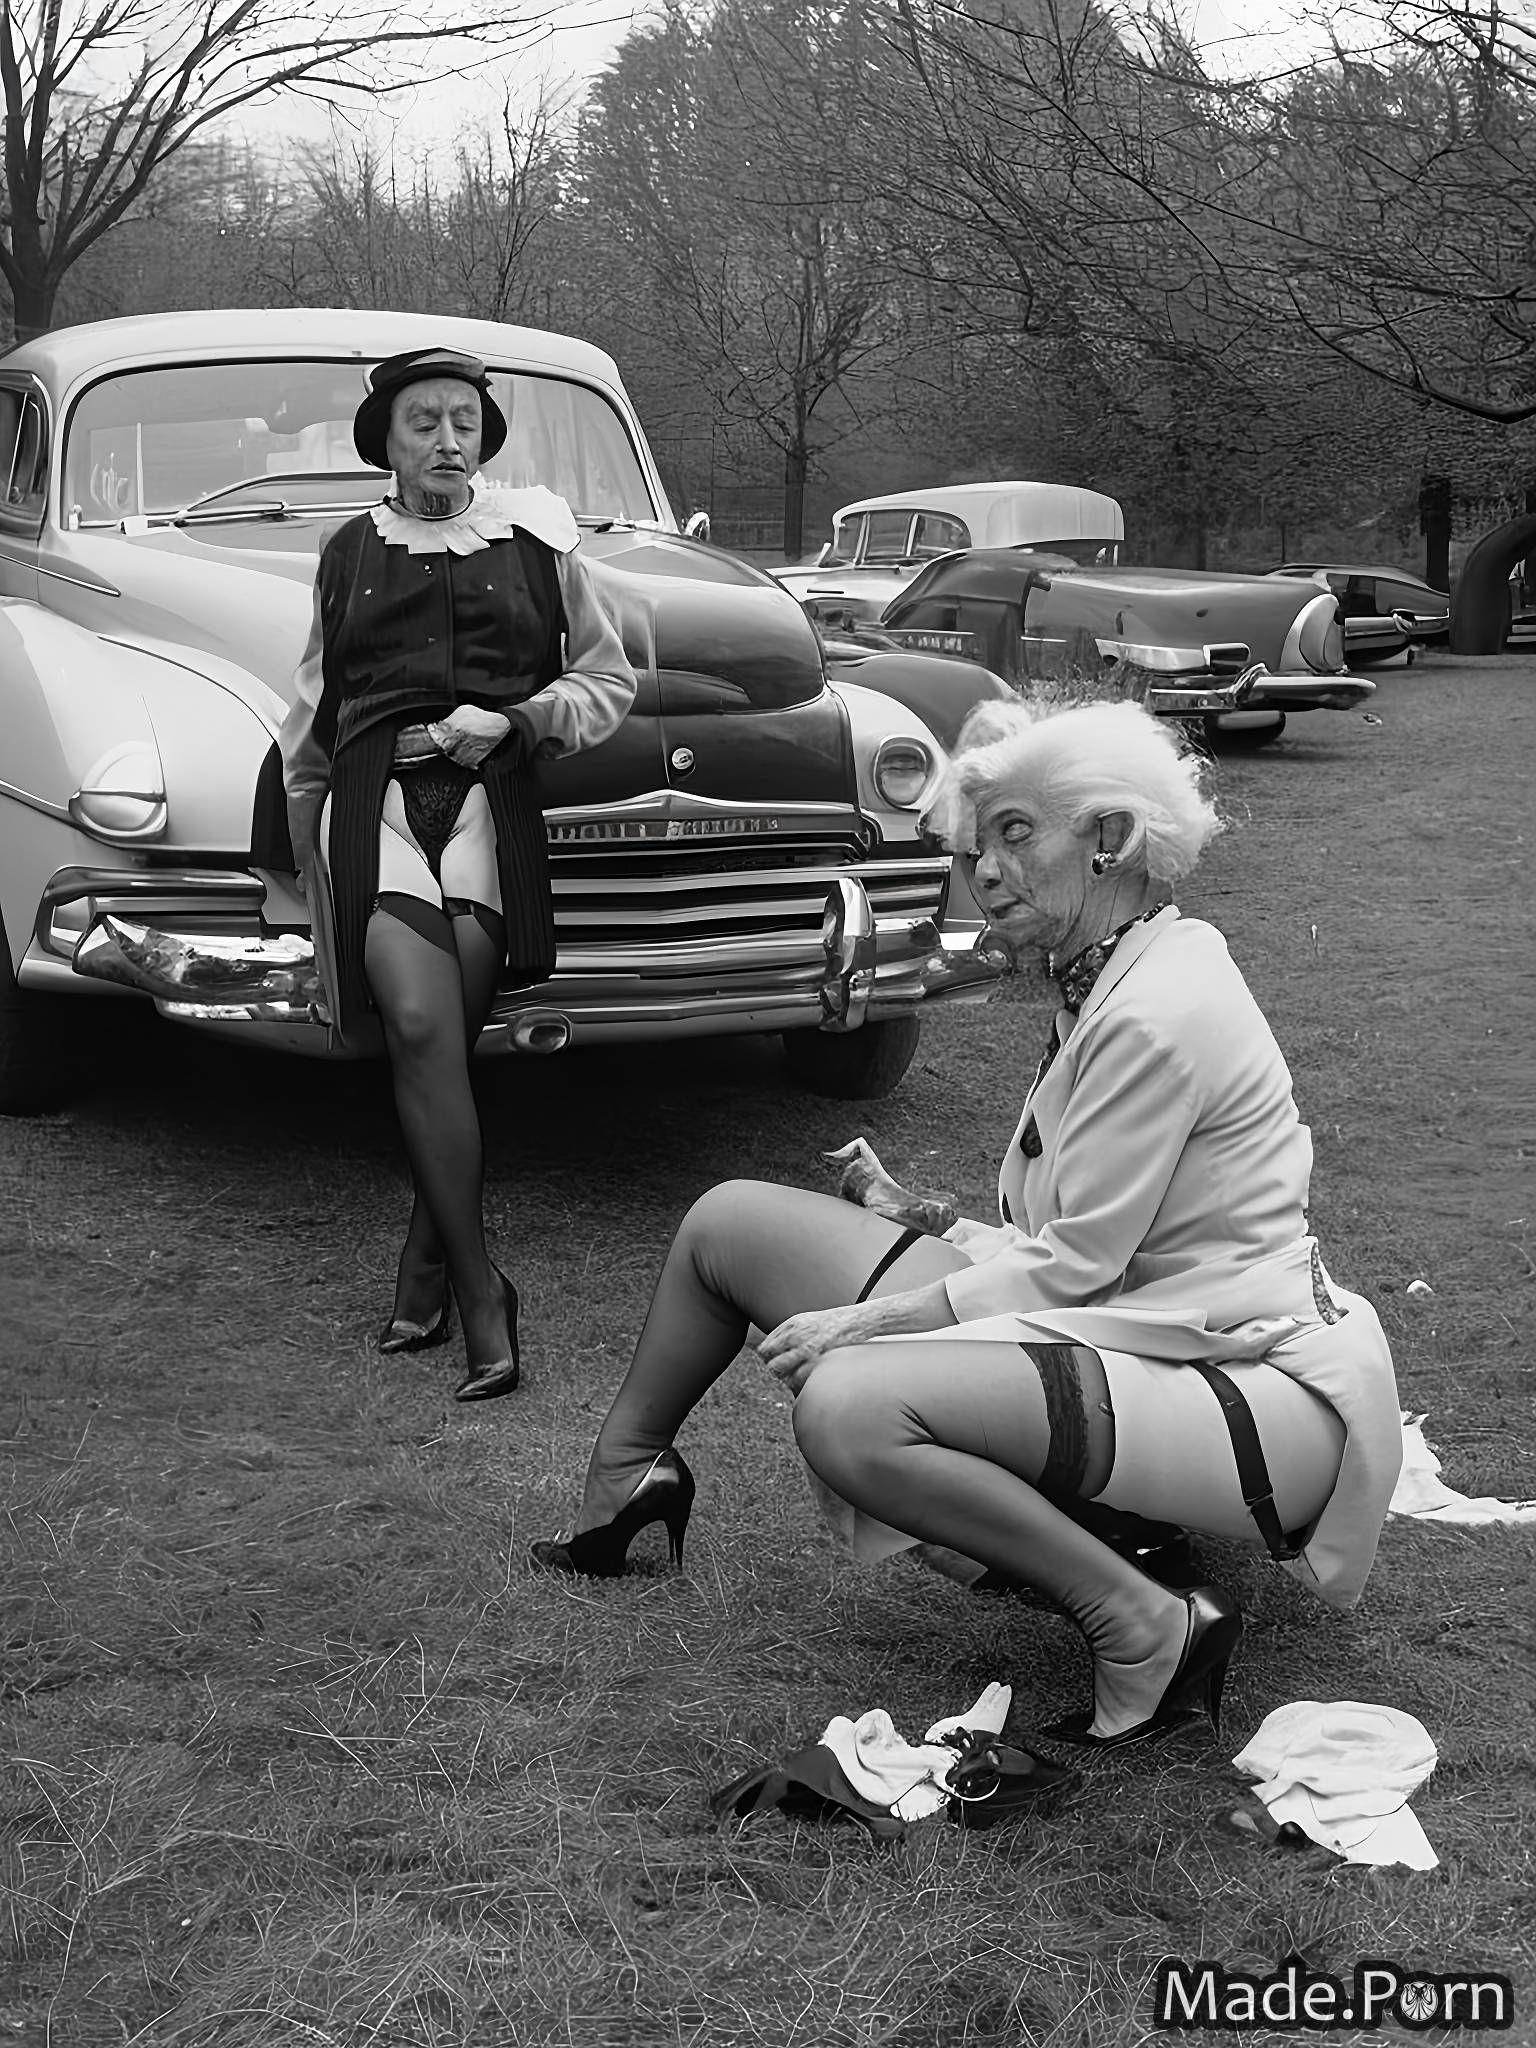 Vintage Cars Nude - Porn image of washing car 80 nude 40s high heels stockings suspender belt  gray created by AI